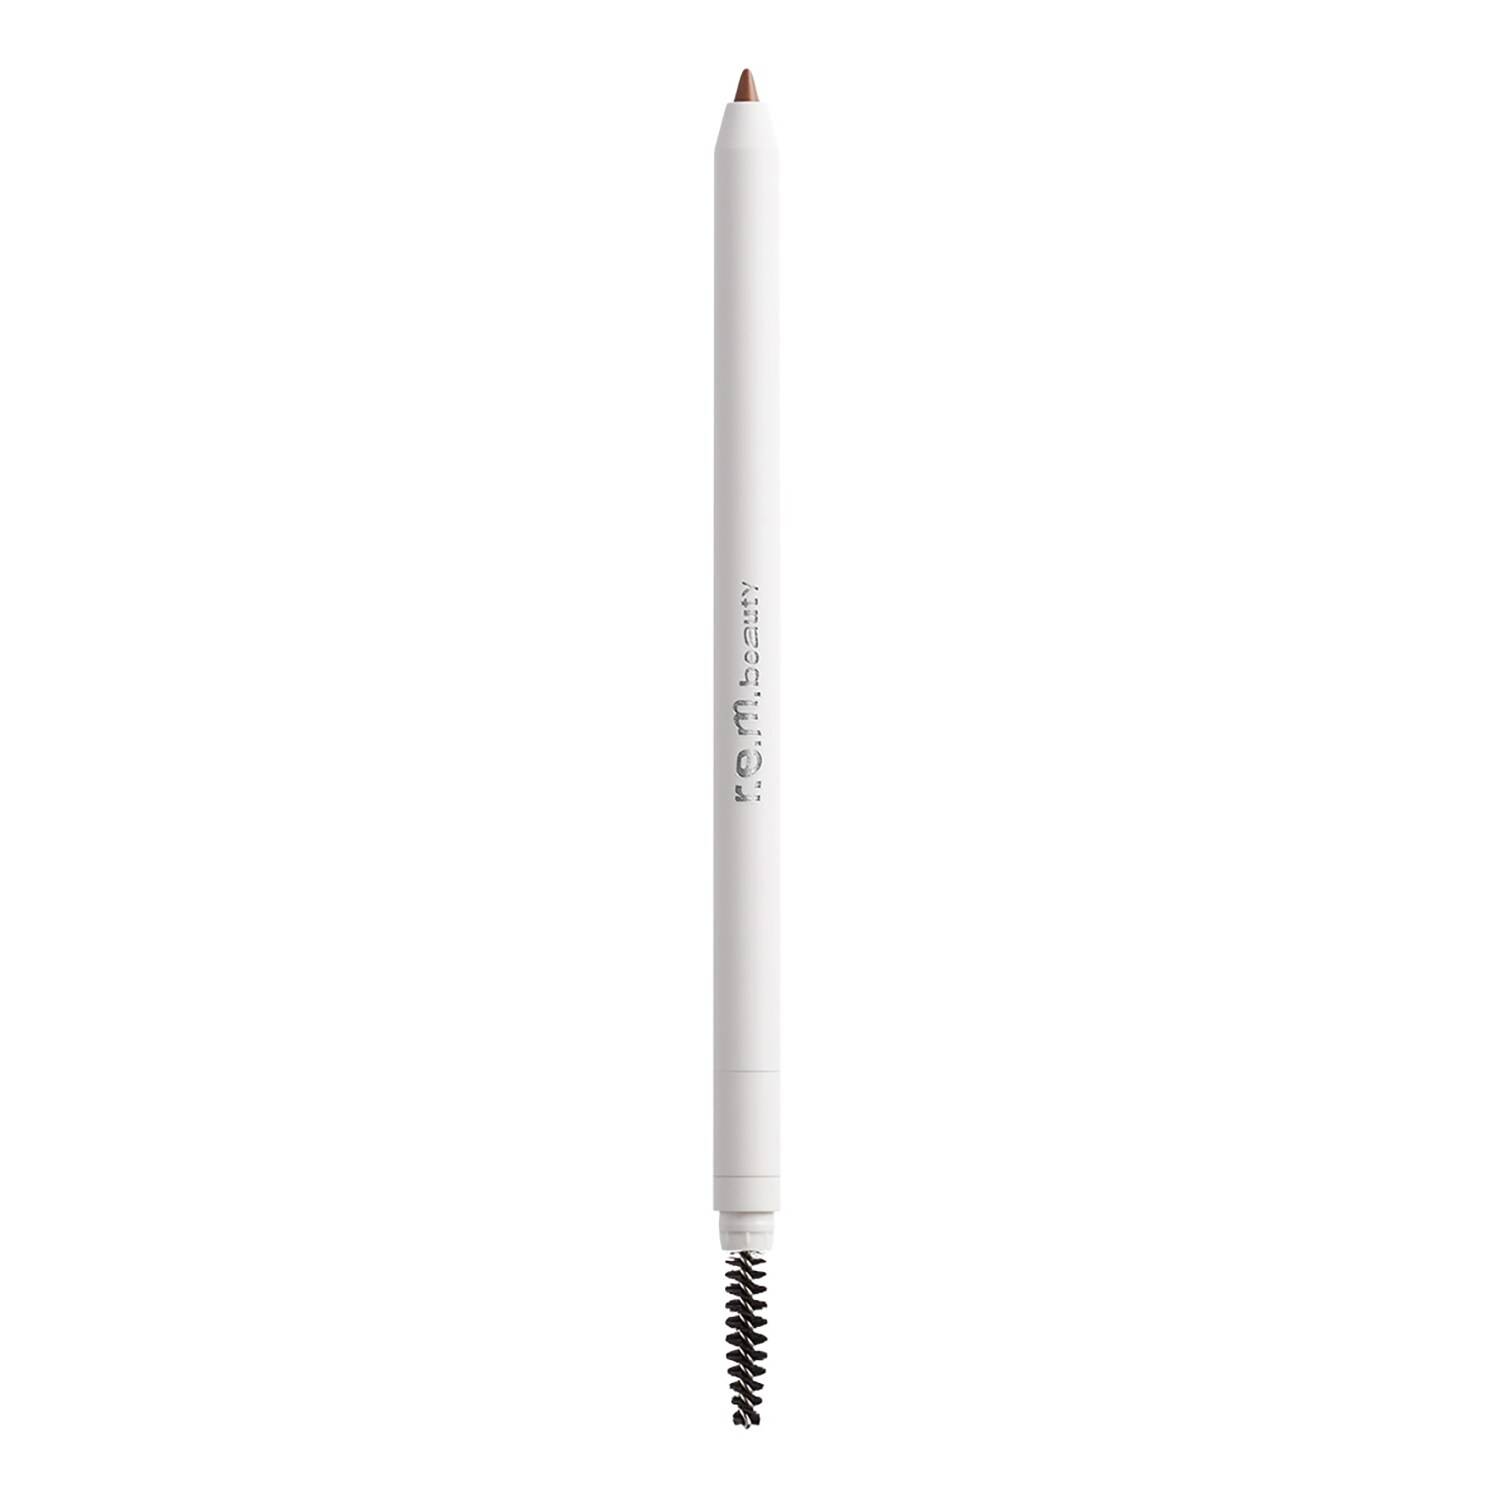 Rem Beauty Space Shape Brow Pencil 0.5G Strawberry Blonde 0.50G